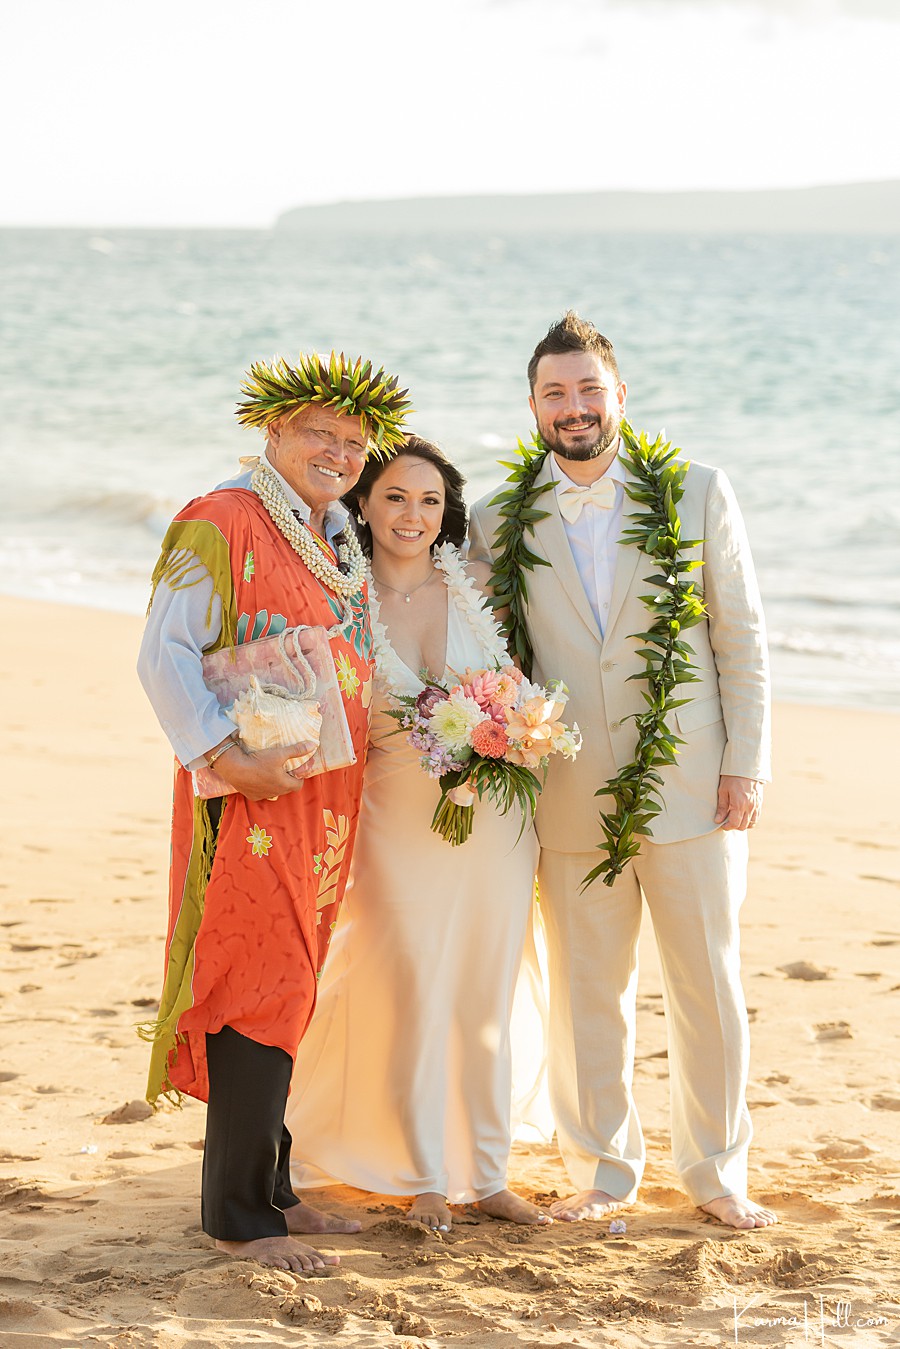 Maui wedding ministers and Officiants
